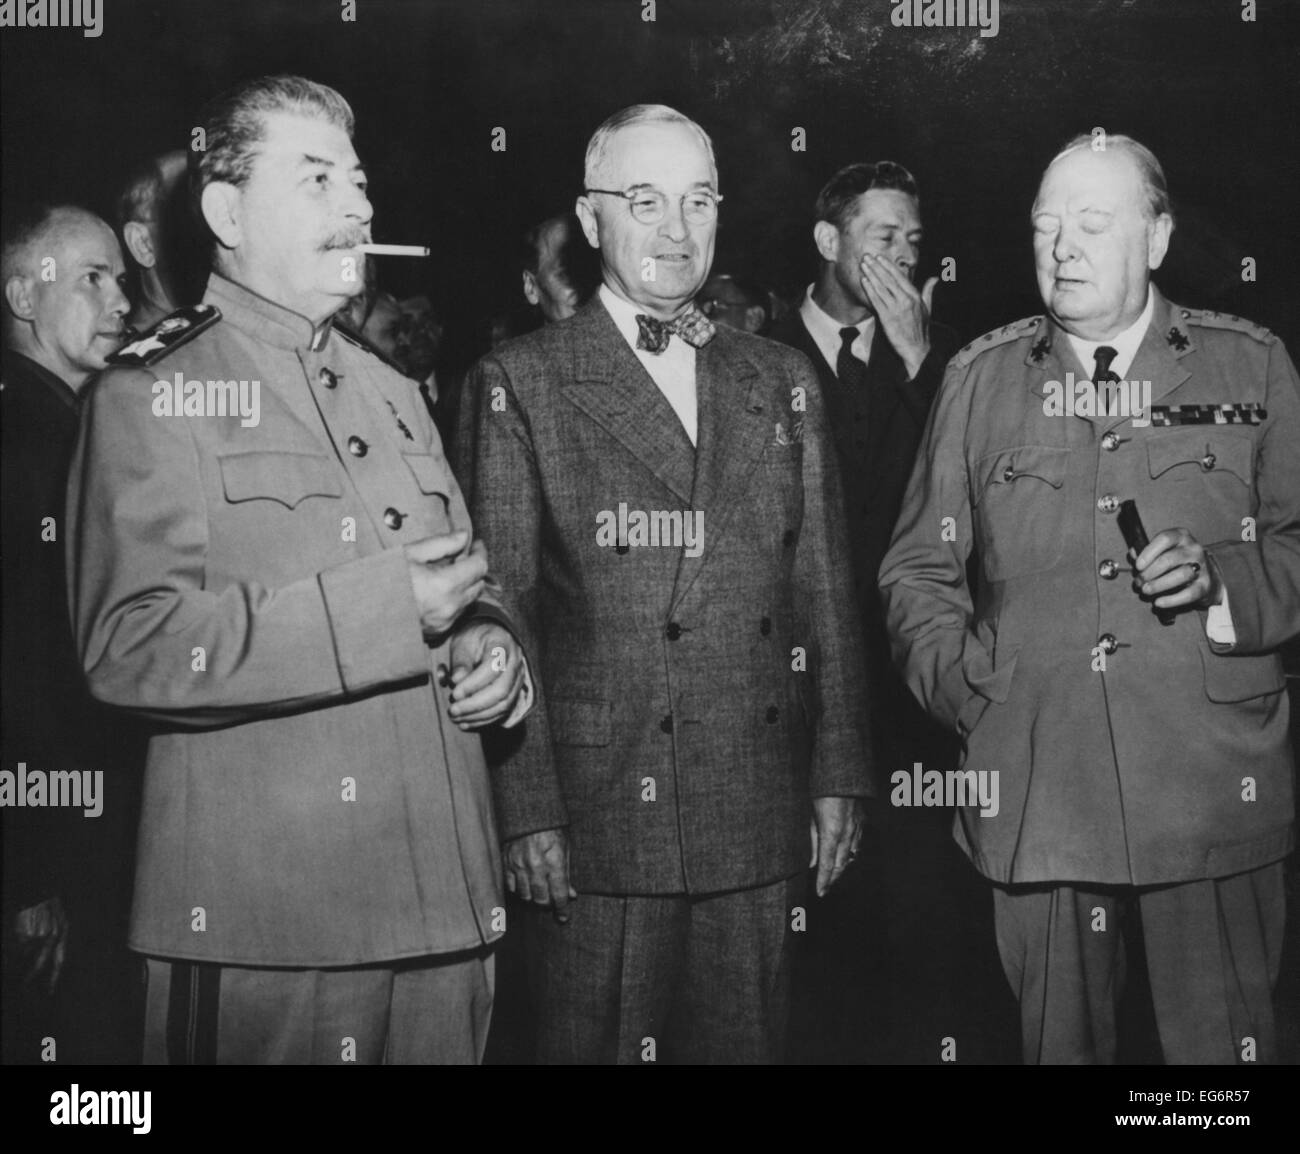 The 'Big Three' leaders of the Allies fighting against the Axis nations of World War 2. L-R: Joseph Stalin, Harry Truman, and Stock Photo